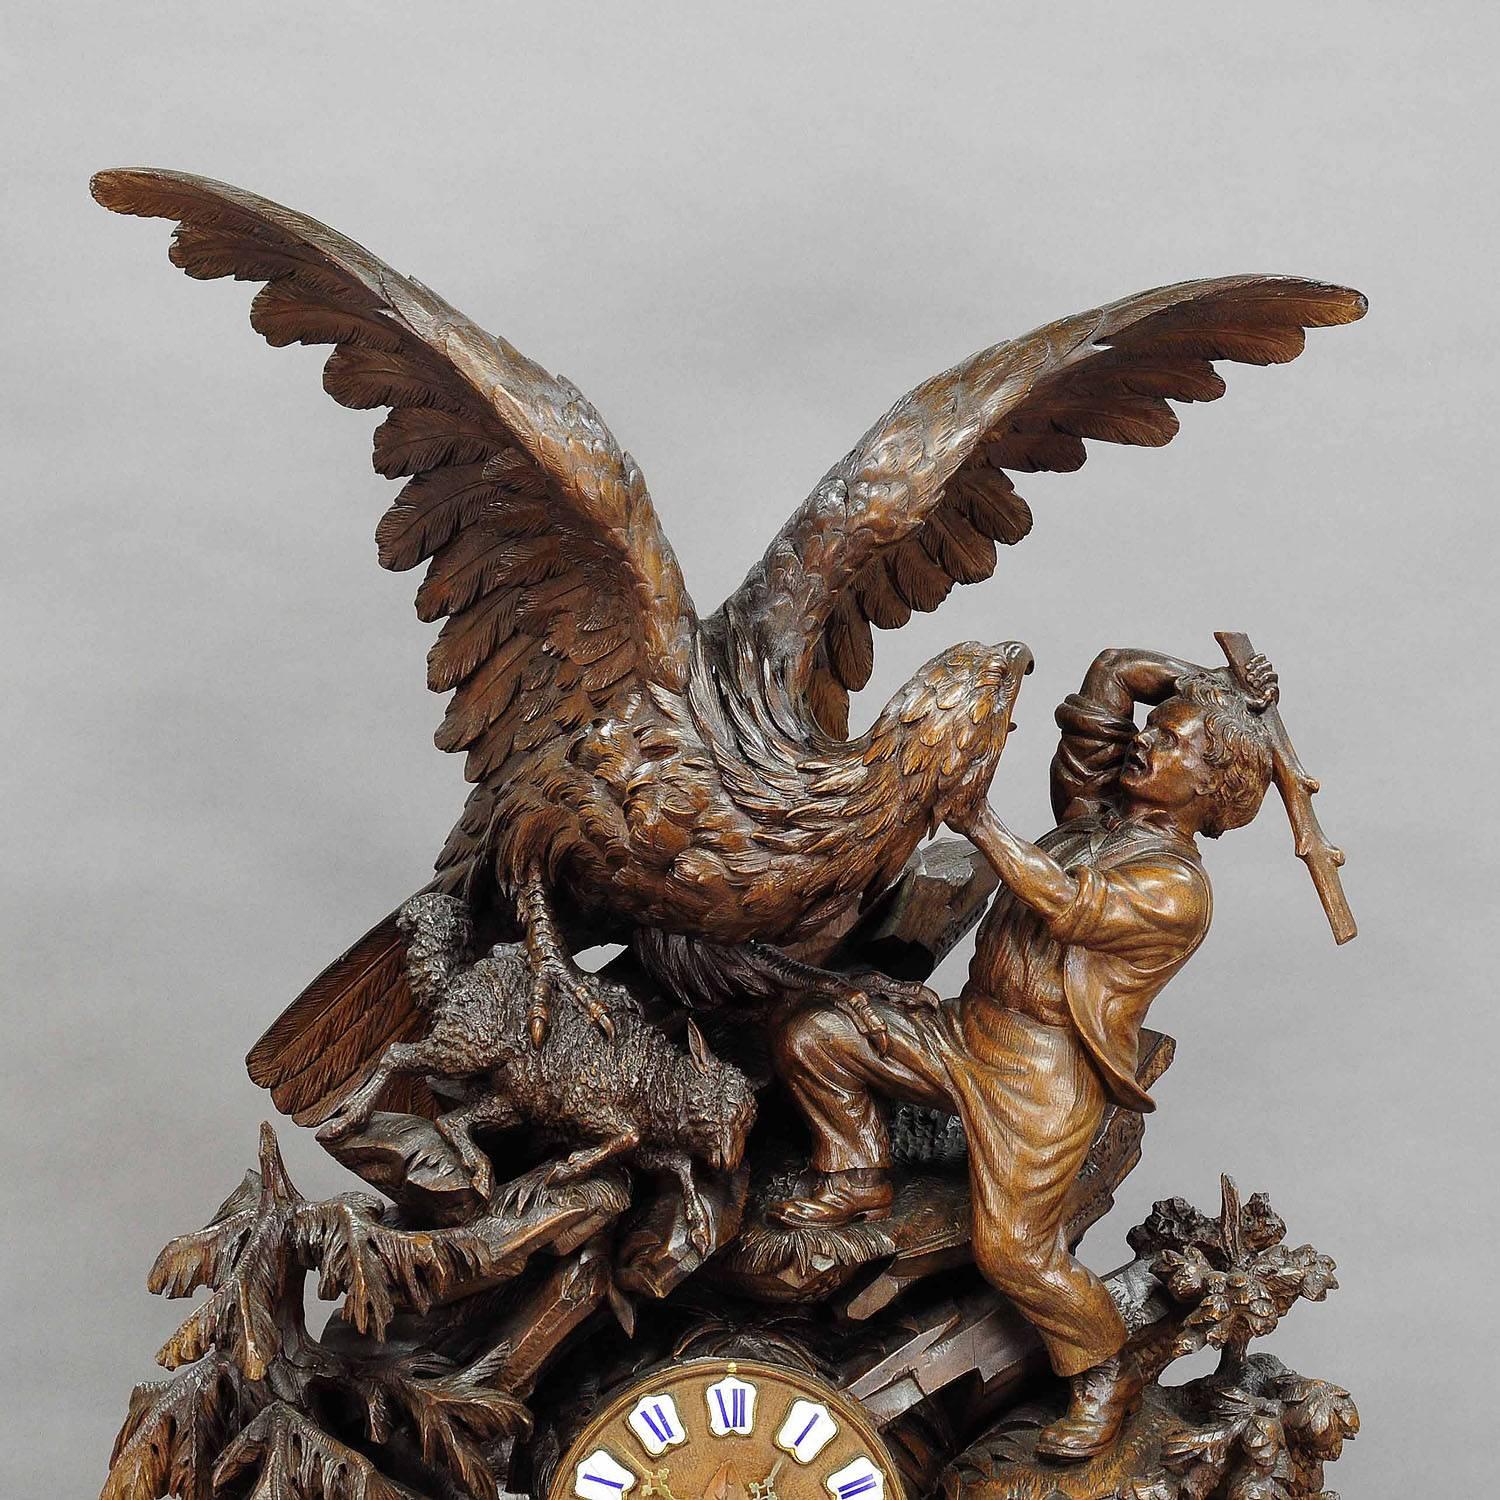 A world class wooden black forest mantel clock. Decorated with a finely carved eagle attacking a mountain sheep. The shepherd is defending the sheep. An extremely rare and elaborate carved clock. Executed in Brienz, circa 1900, the clockwork is